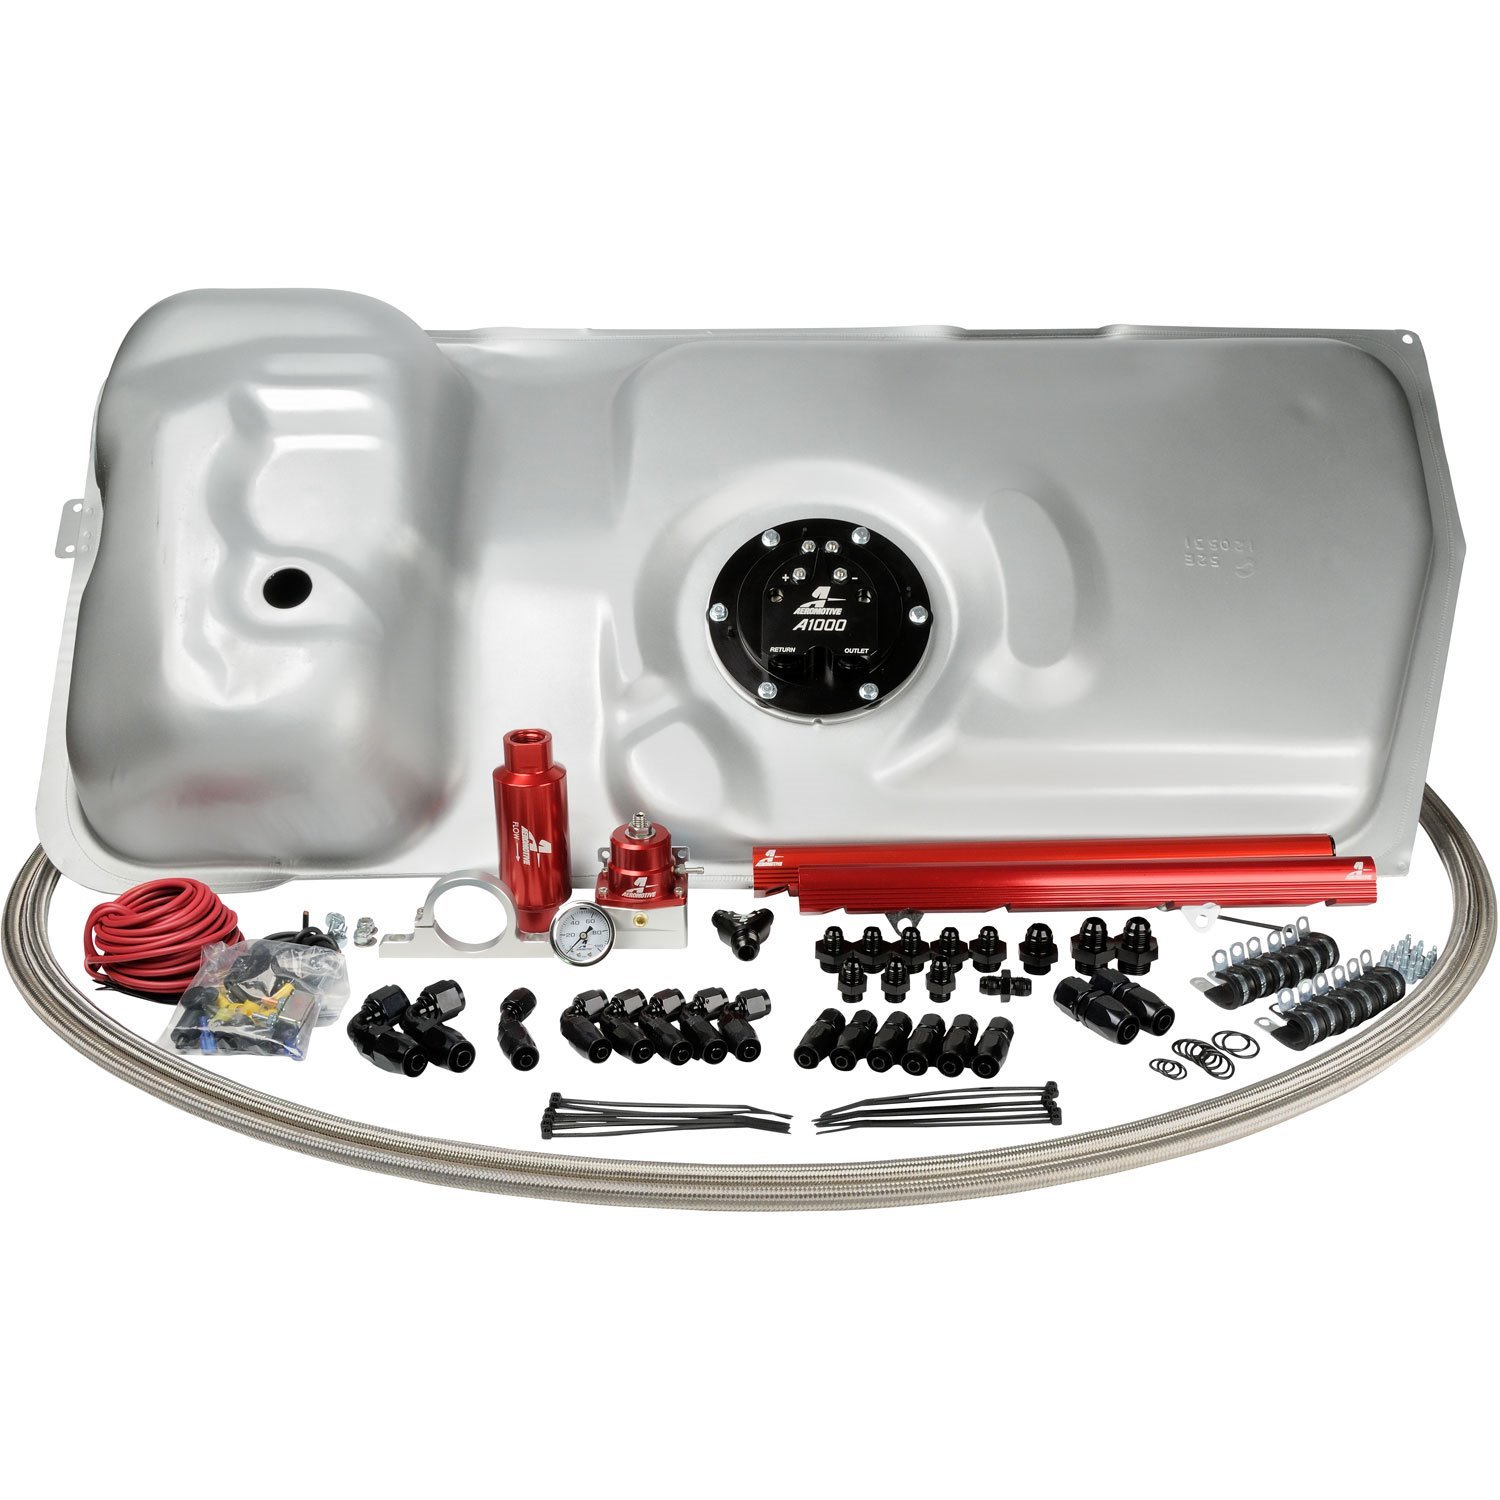 Complete Fuel Tank System with A1000 Fuel Pump 1986-1998.5 Mustang